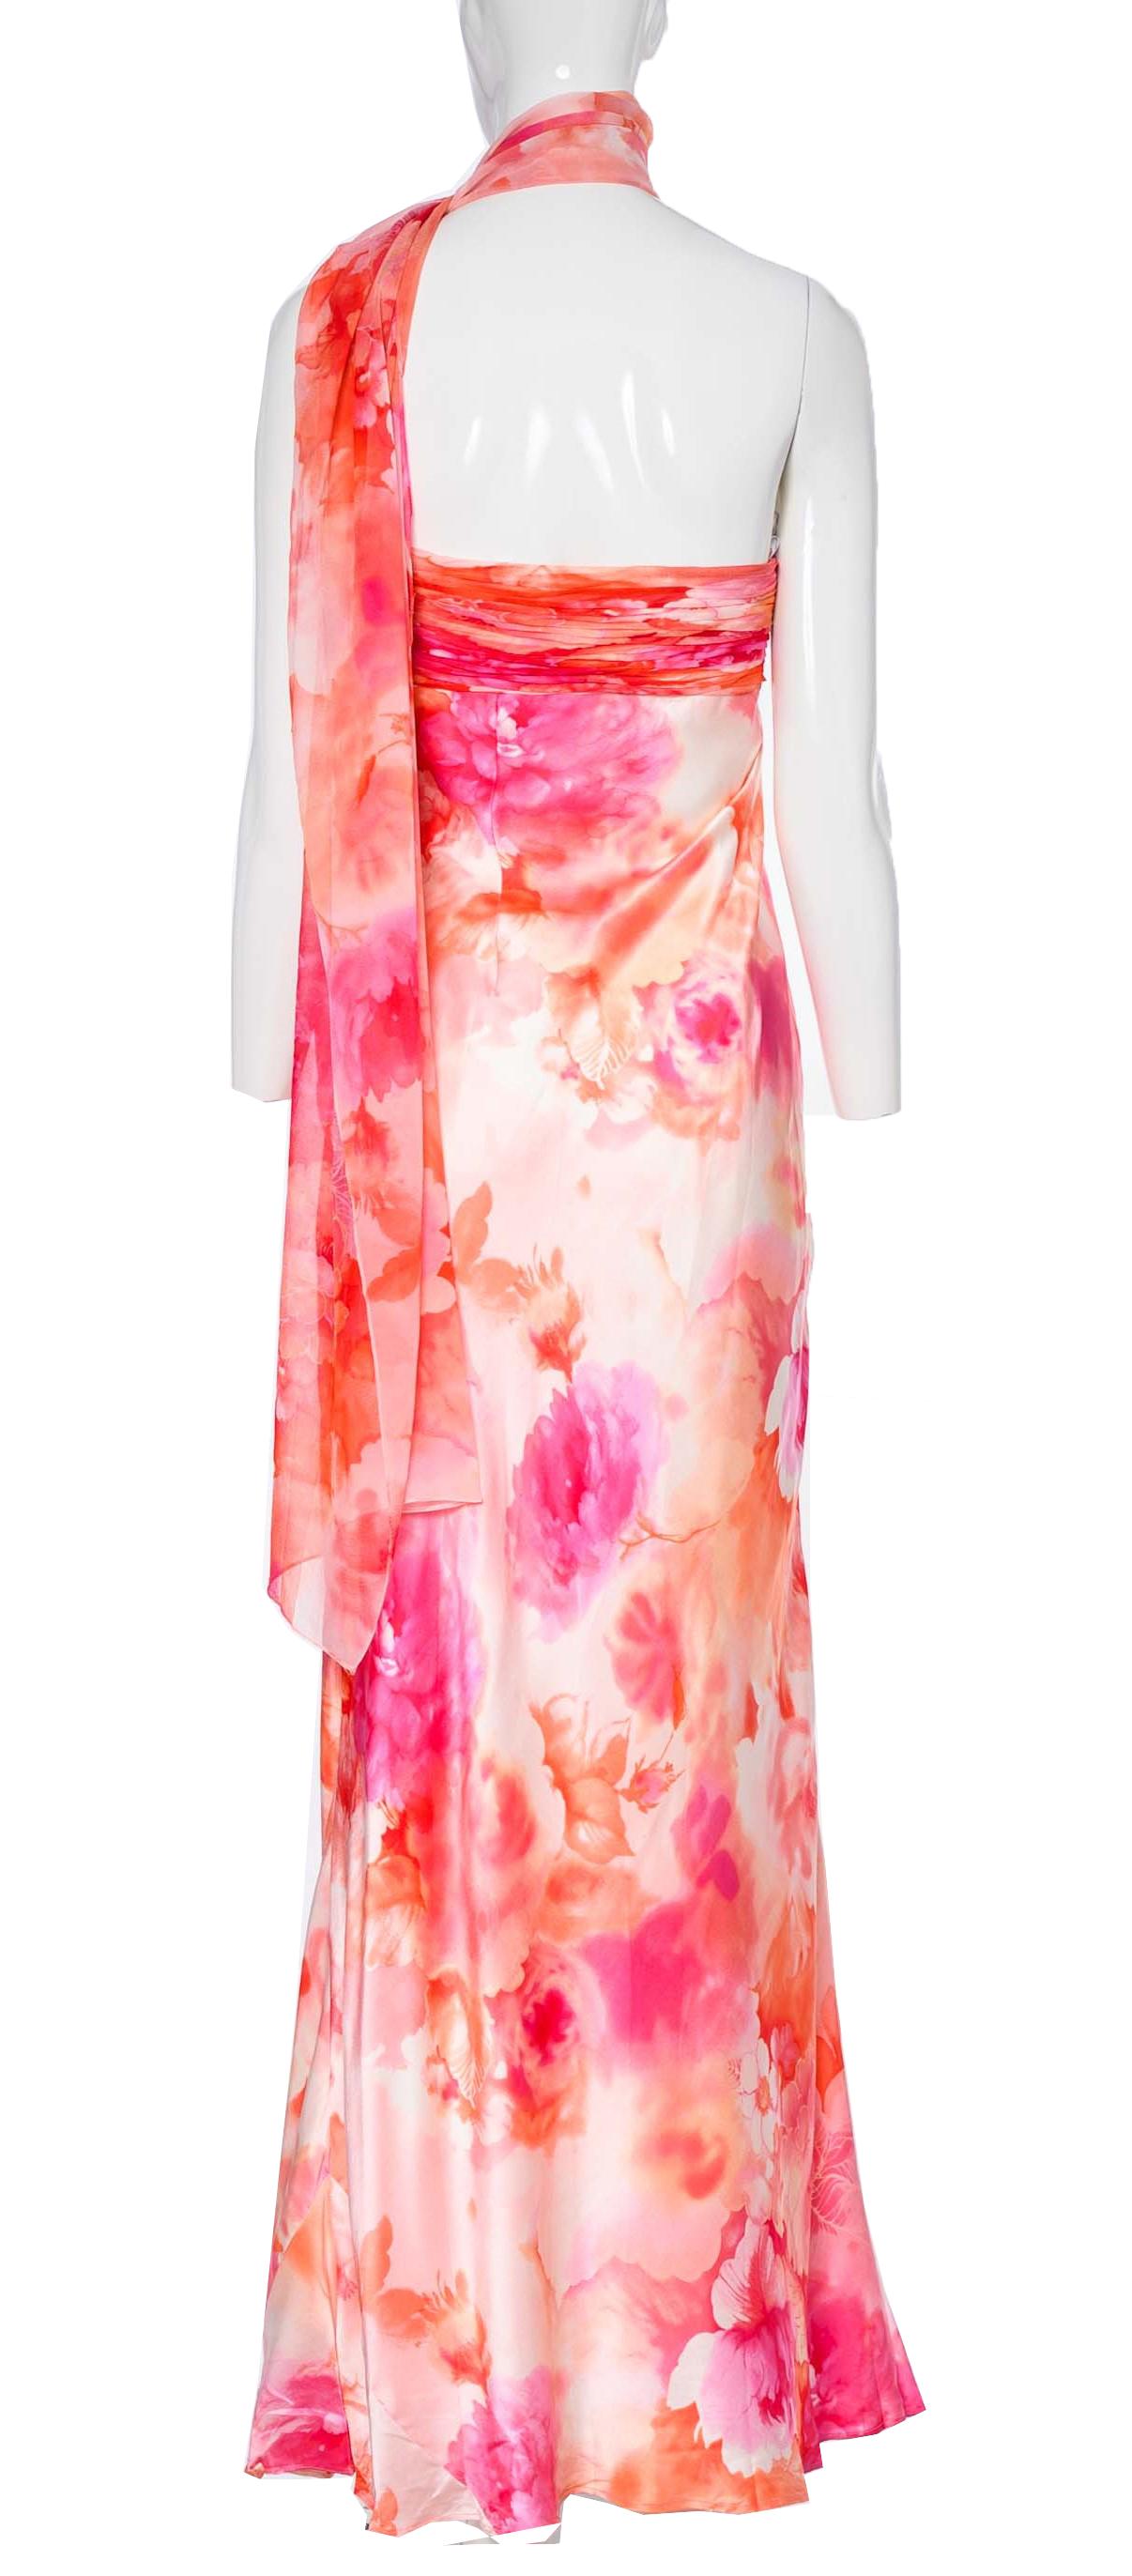 The Diane Freis Watercolour Floral Print Dress is a truly enchanting piece. Crafted from a vibrant silk fabric in a pink and red ombre design, this dress showcases a stunning and colorful display. The dress features intricate floral print details